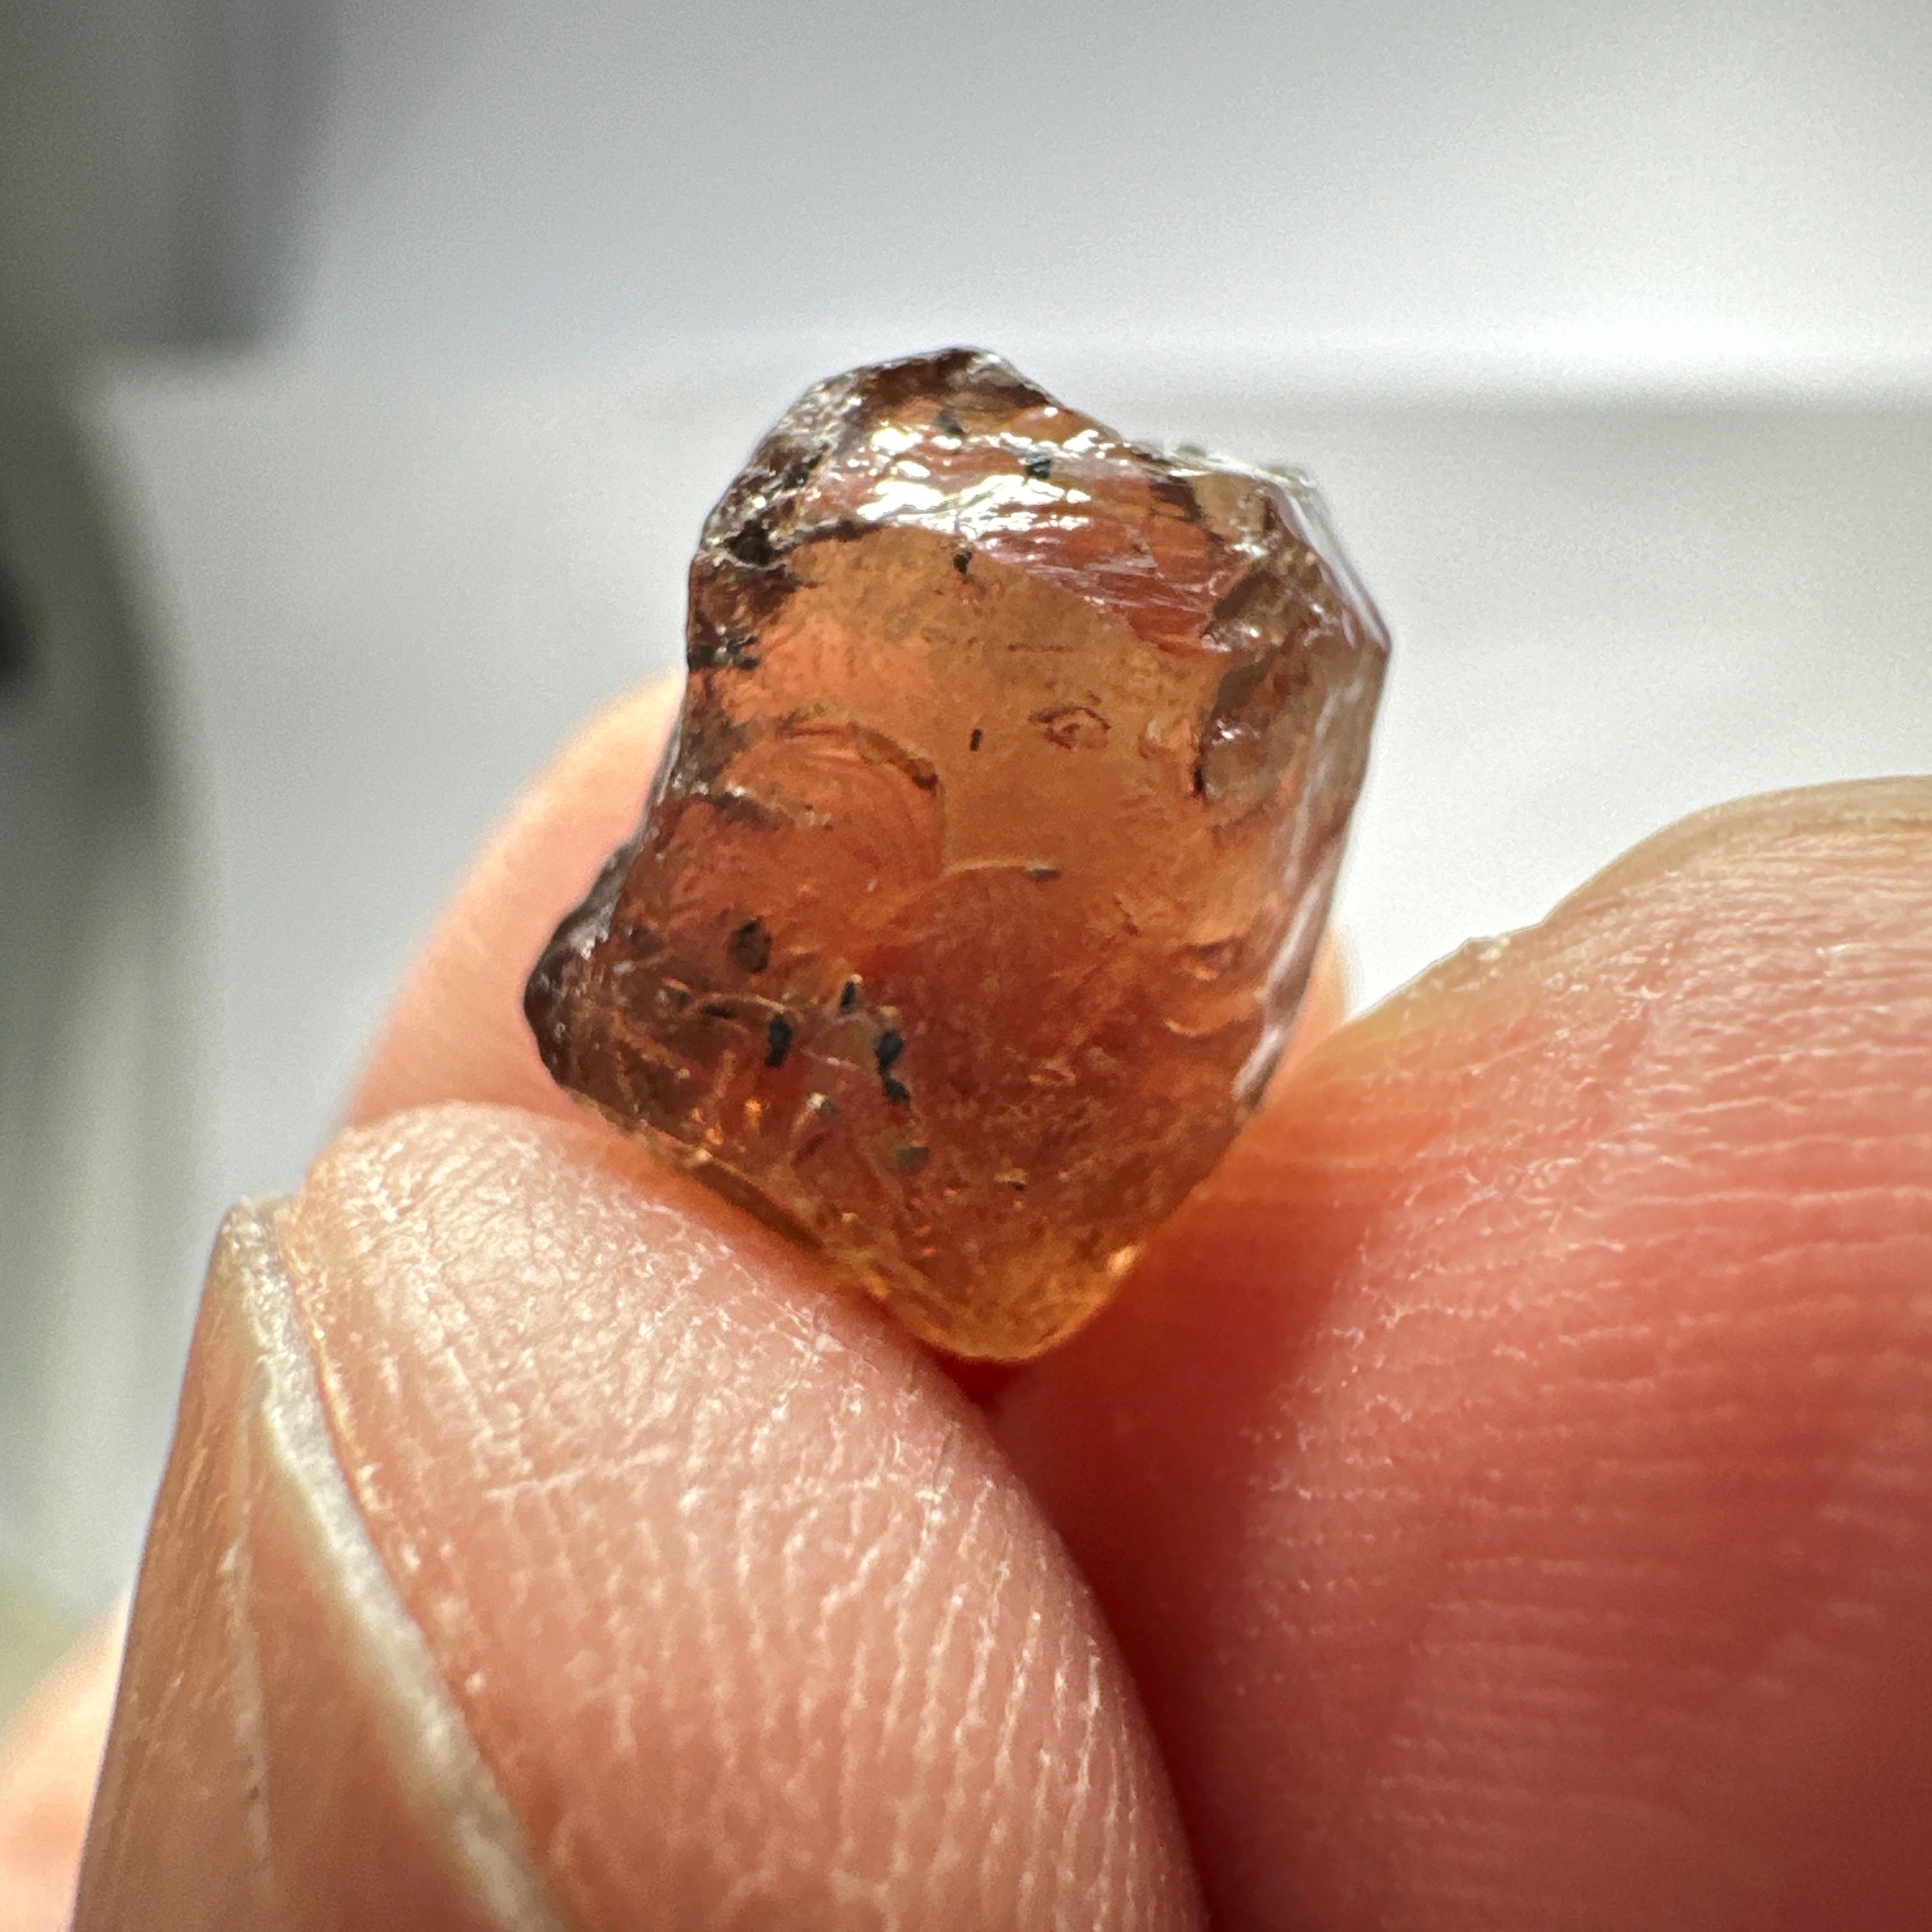 6.75ct Colour Change Garnet, Tanzania, Untreated Unheated, silky with slight inclusions on the outside